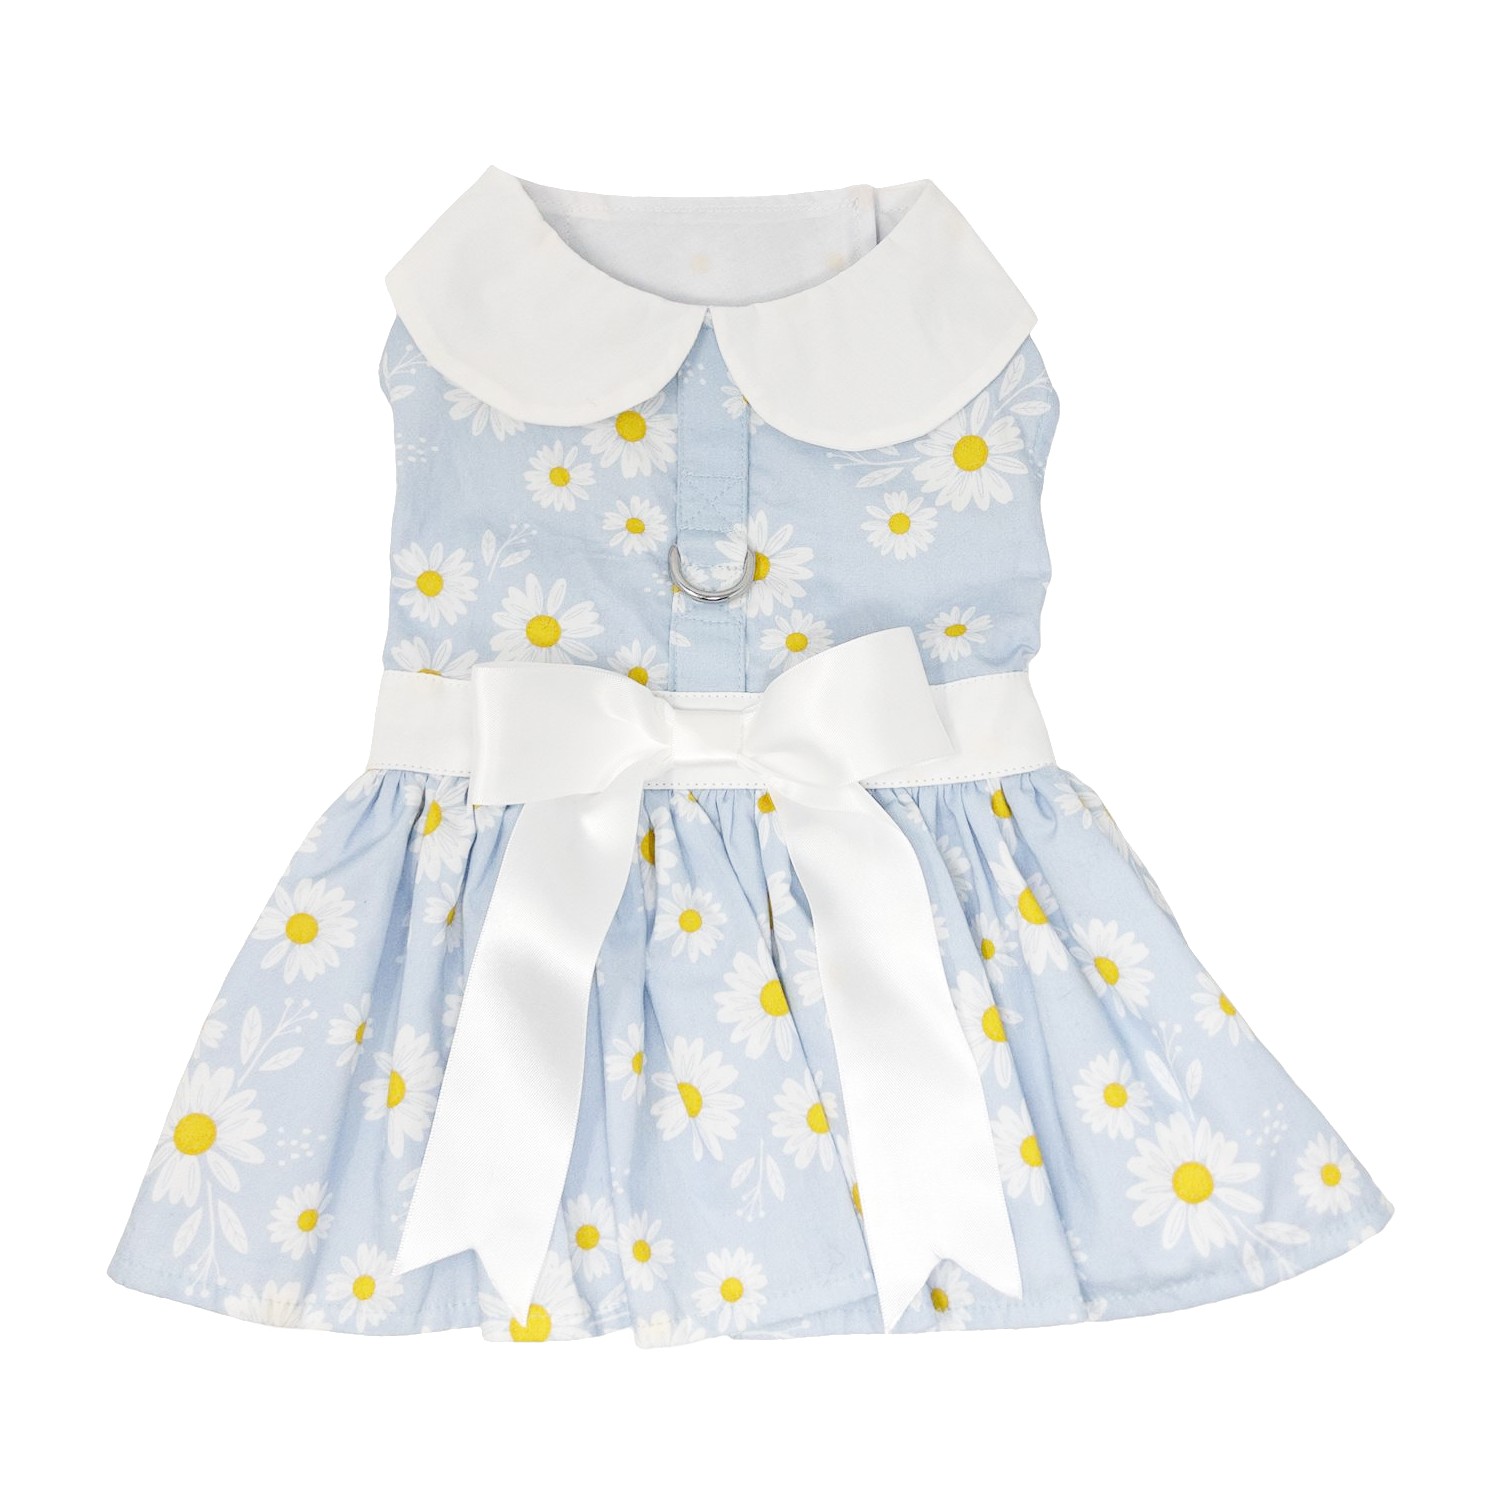 Blue Daisy Dog Dress with Matching Leash by Doggie Design